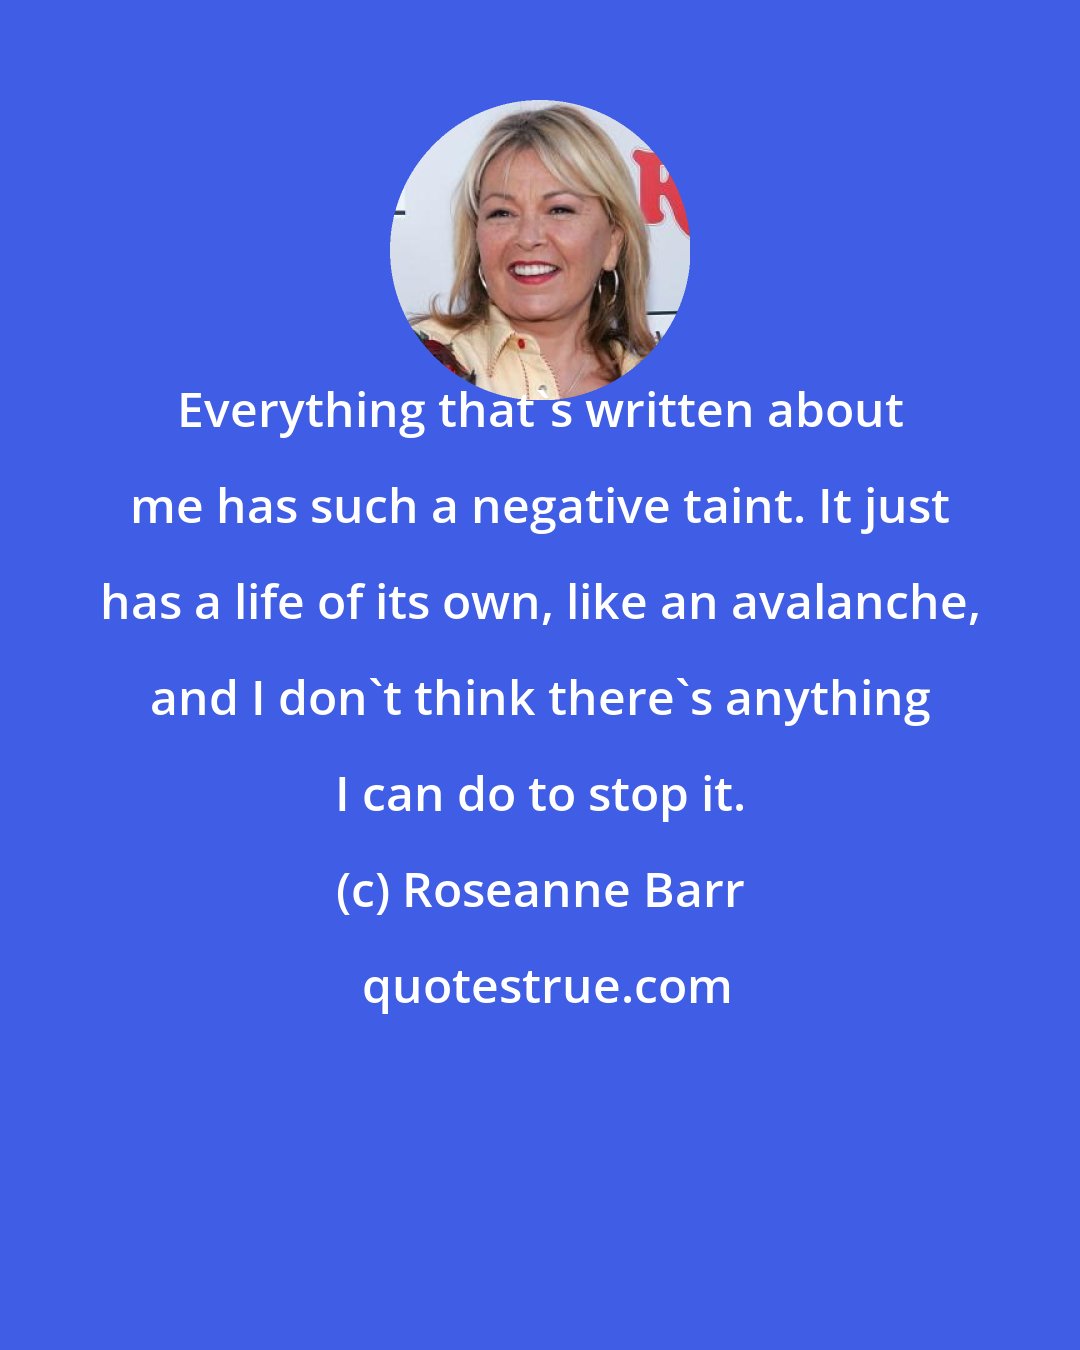 Roseanne Barr: Everything that`s written about me has such a negative taint. It just has a life of its own, like an avalanche, and I don`t think there`s anything I can do to stop it.